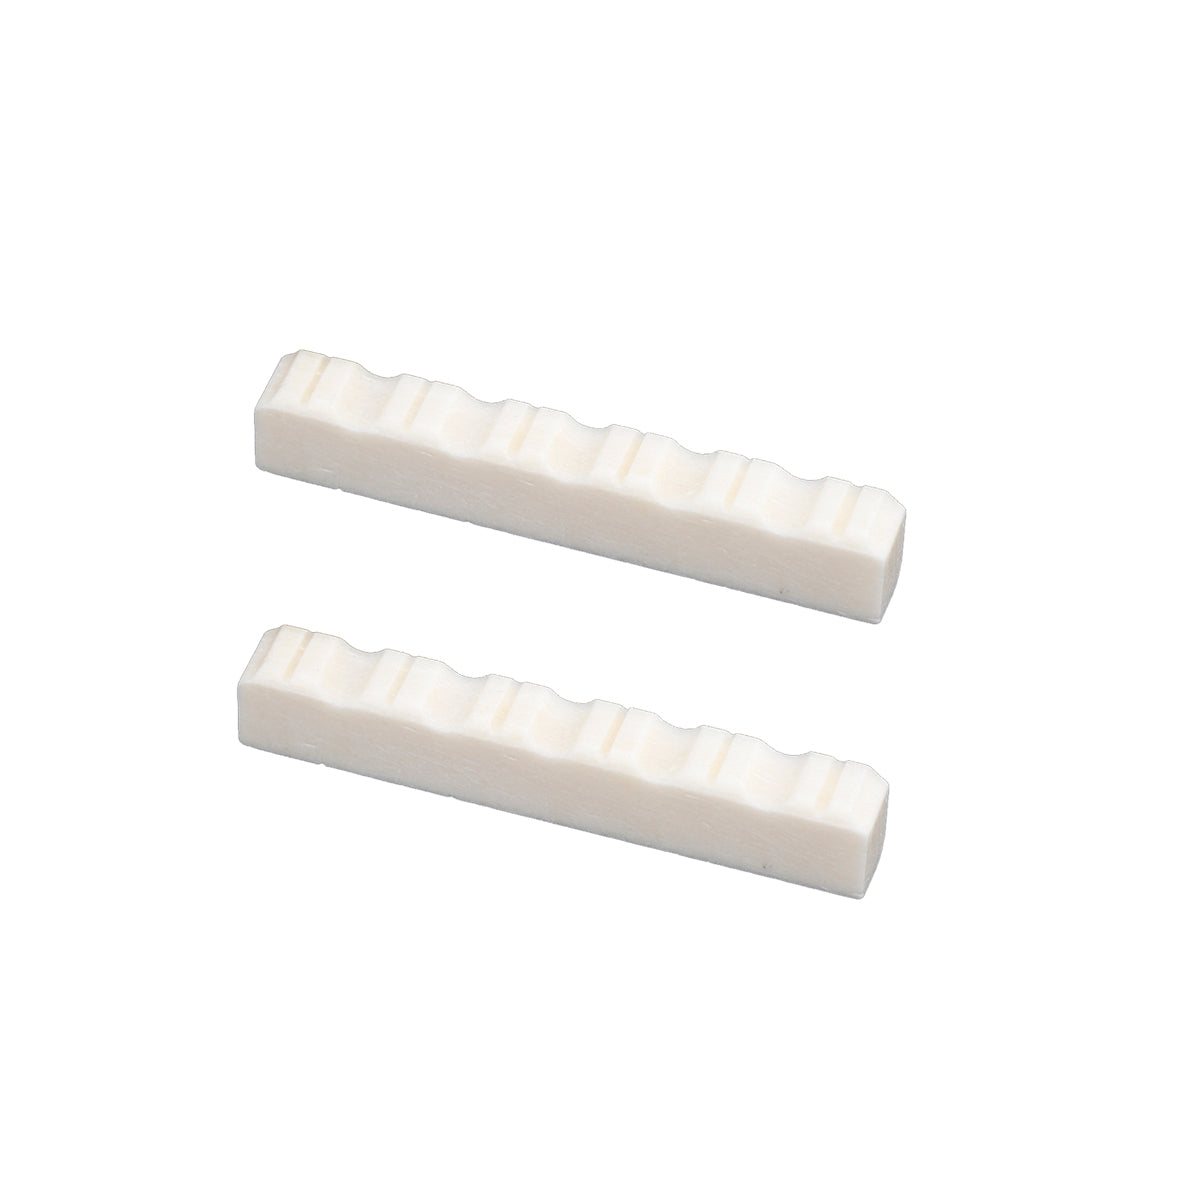 Musiclily Slotted 6 String Classical Guitar Bone Nut,DJ-07 52x6x9mm (2 Pieces)